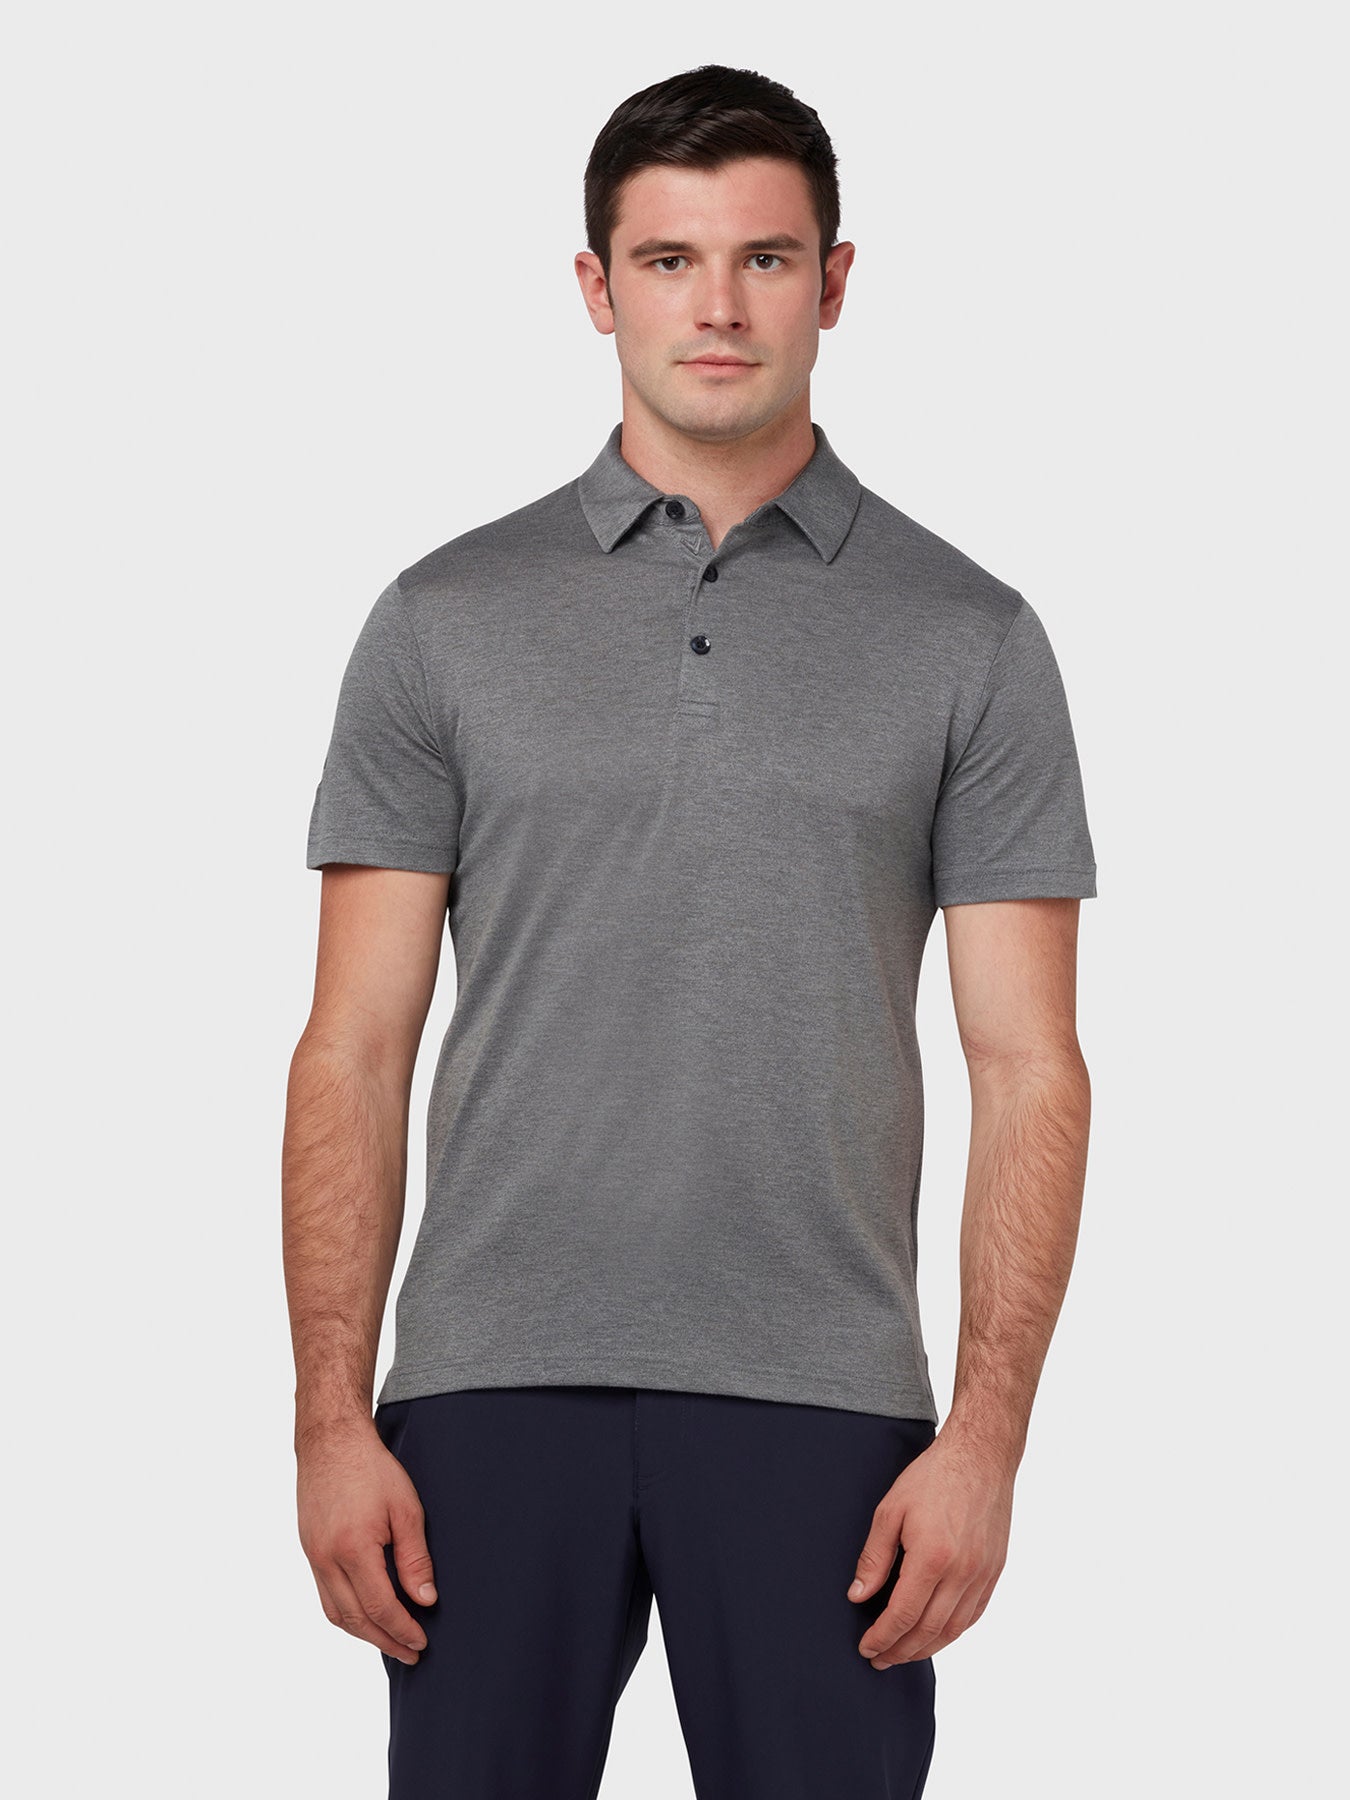 View Soft Touch Solid Polo In Black Heather Black Heather XXL information